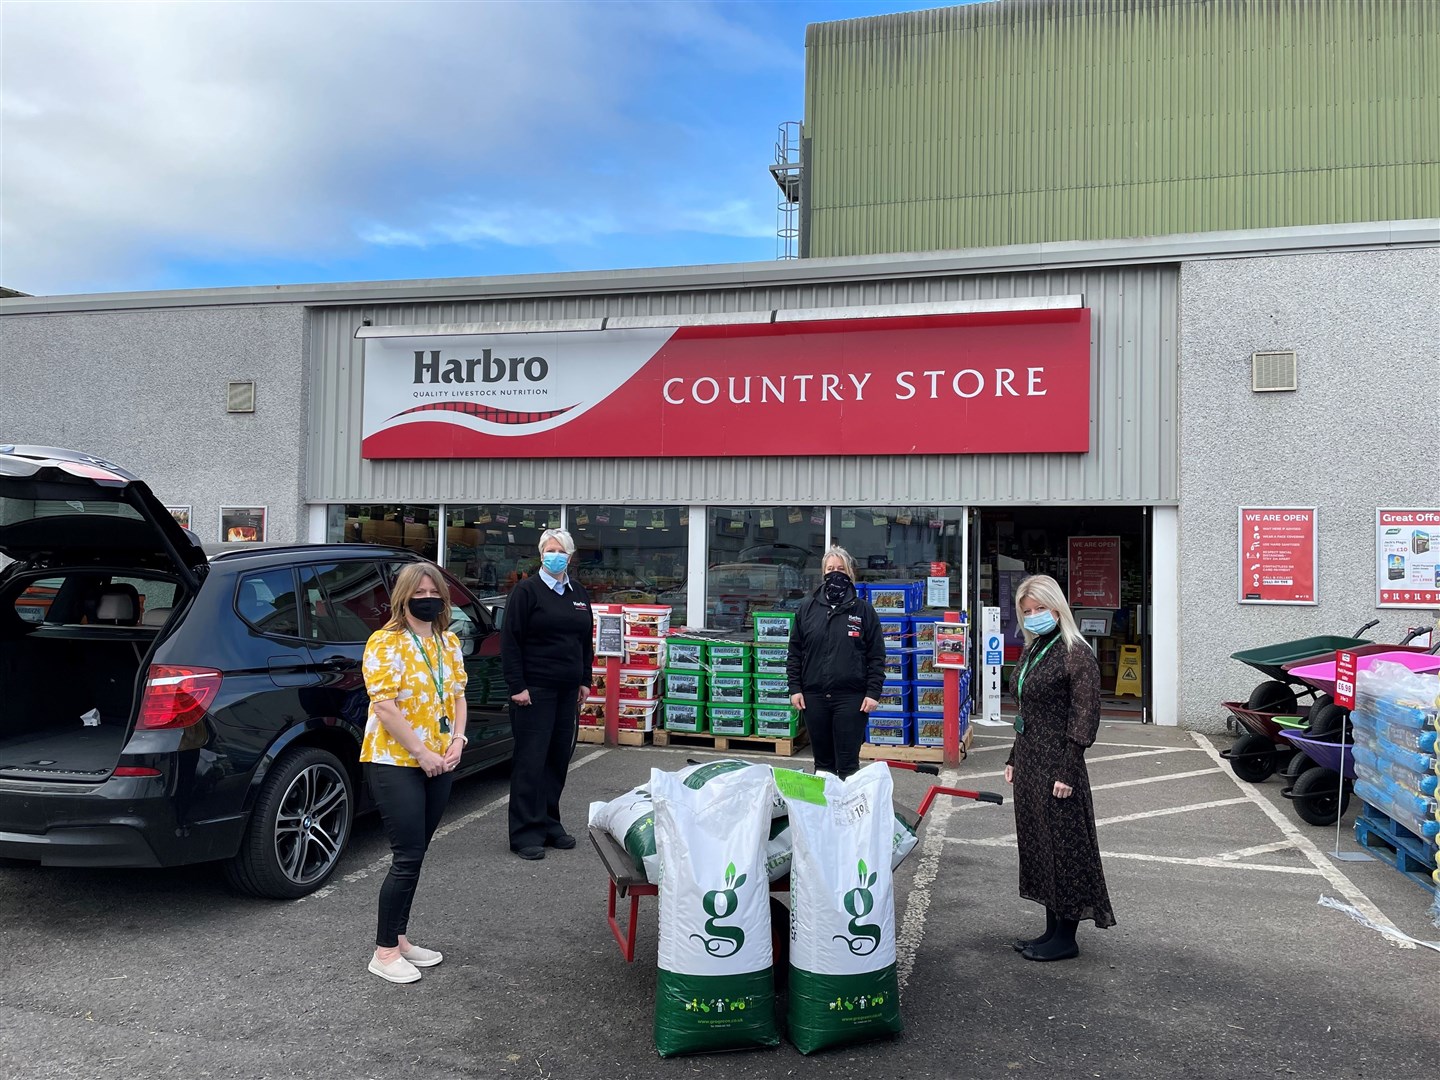 Tracy Sinclair, head teacher and Shona Mitchell, depute head, from Tarradale Primary School, with bags of grass seed, donated by Harbro Country Stores Inverness. They are being handed over by DianeStuart and Sarah Clingan from the store.